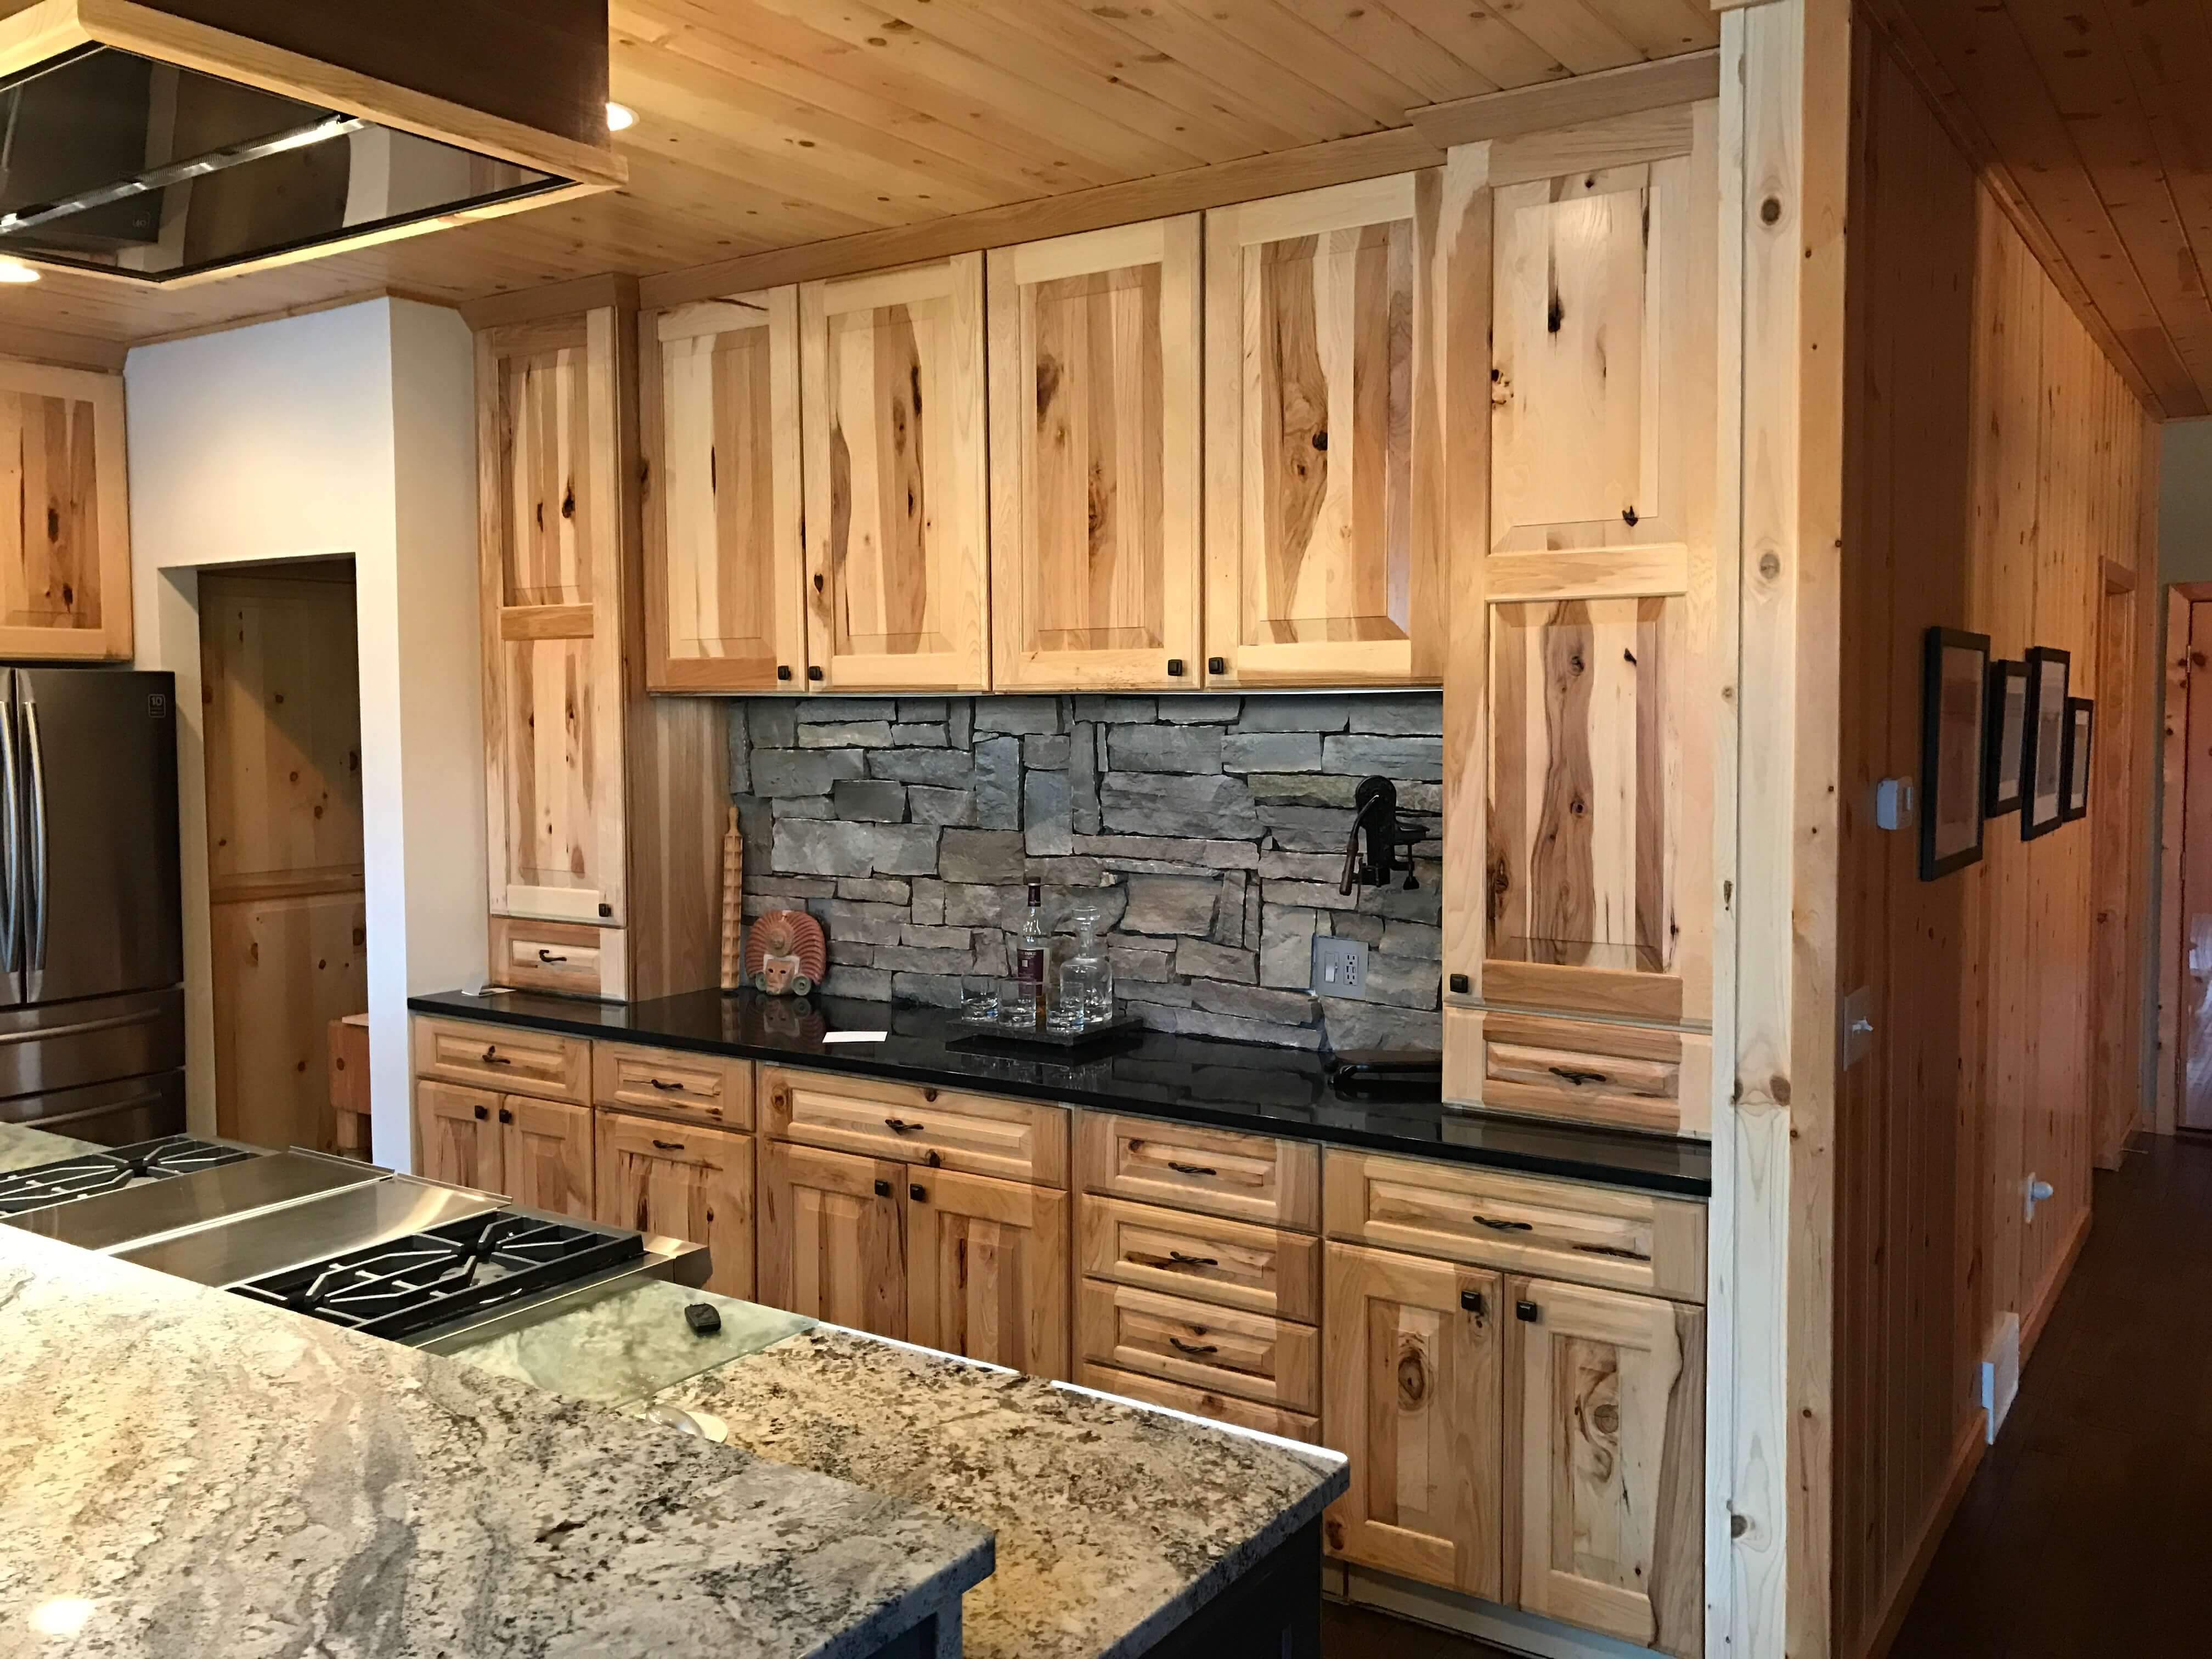 Rustic Hickory Cabinetry, Hickory Cabinets Kitchen Images